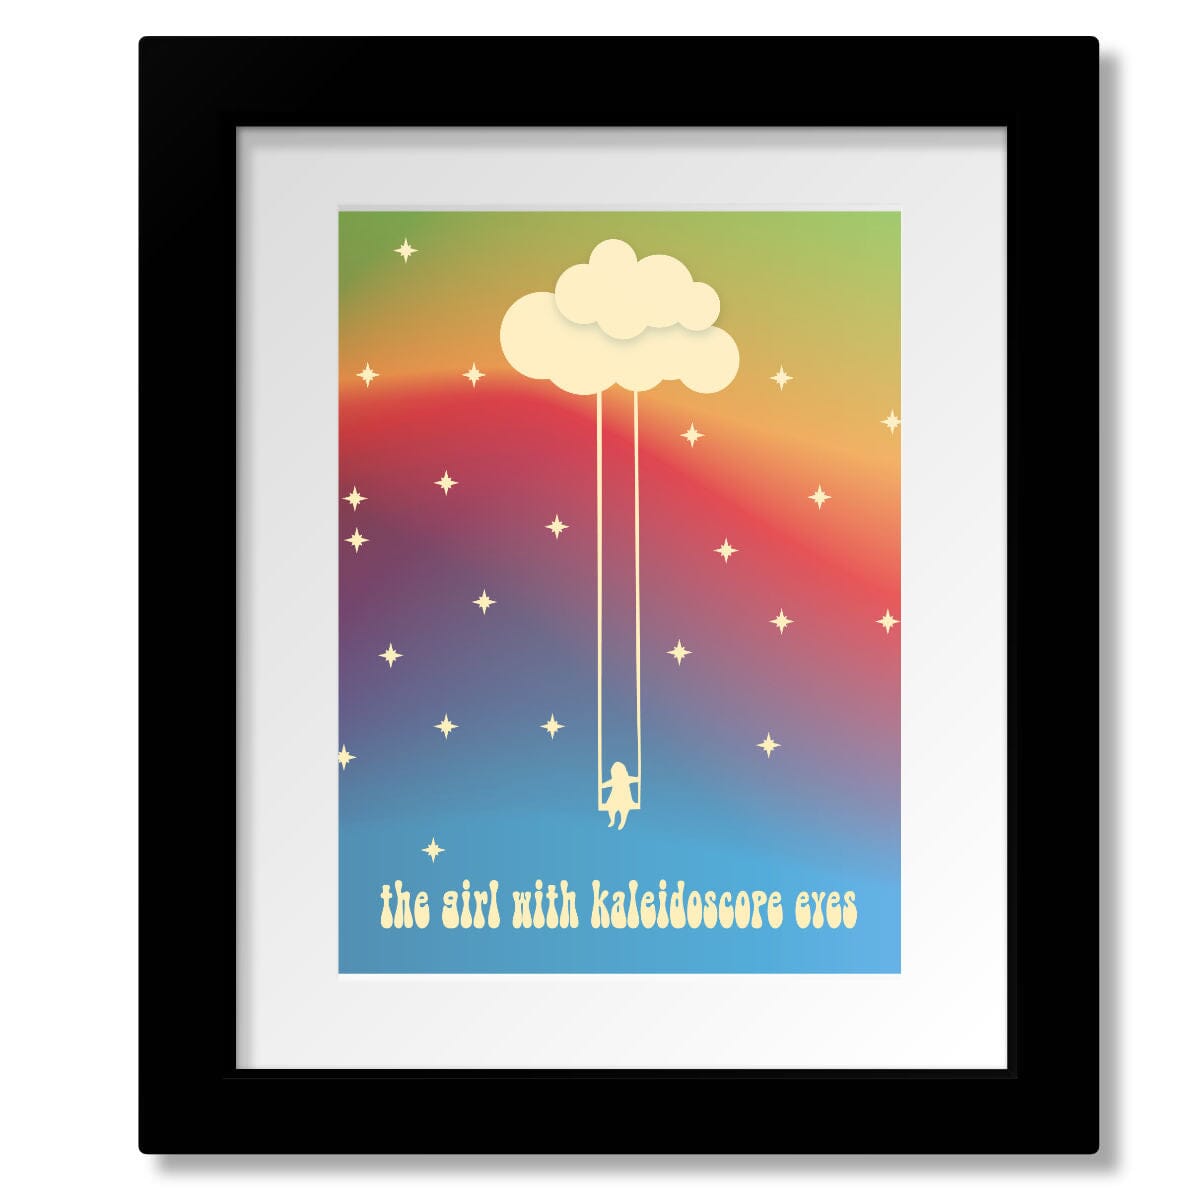 Lucy in the Sky with Diamonds by Beatles - Song Lyric Art Song Lyrics Art Song Lyrics Art 8x10 Matted and Framed Print 